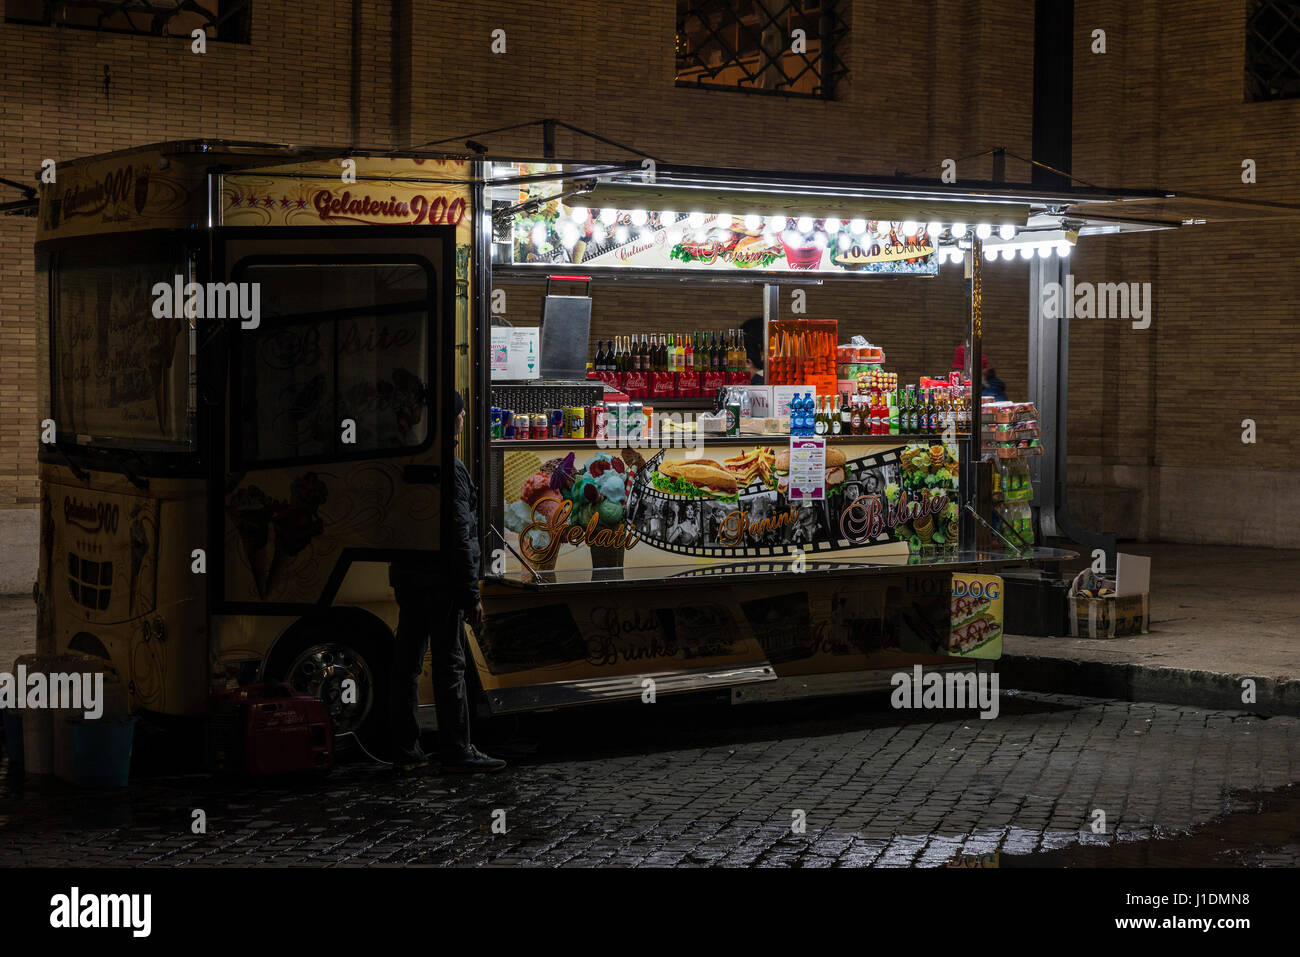 Rome, Italy - January 4, 2017: Food truck on a street at night in Rome, Italy Stock Photo